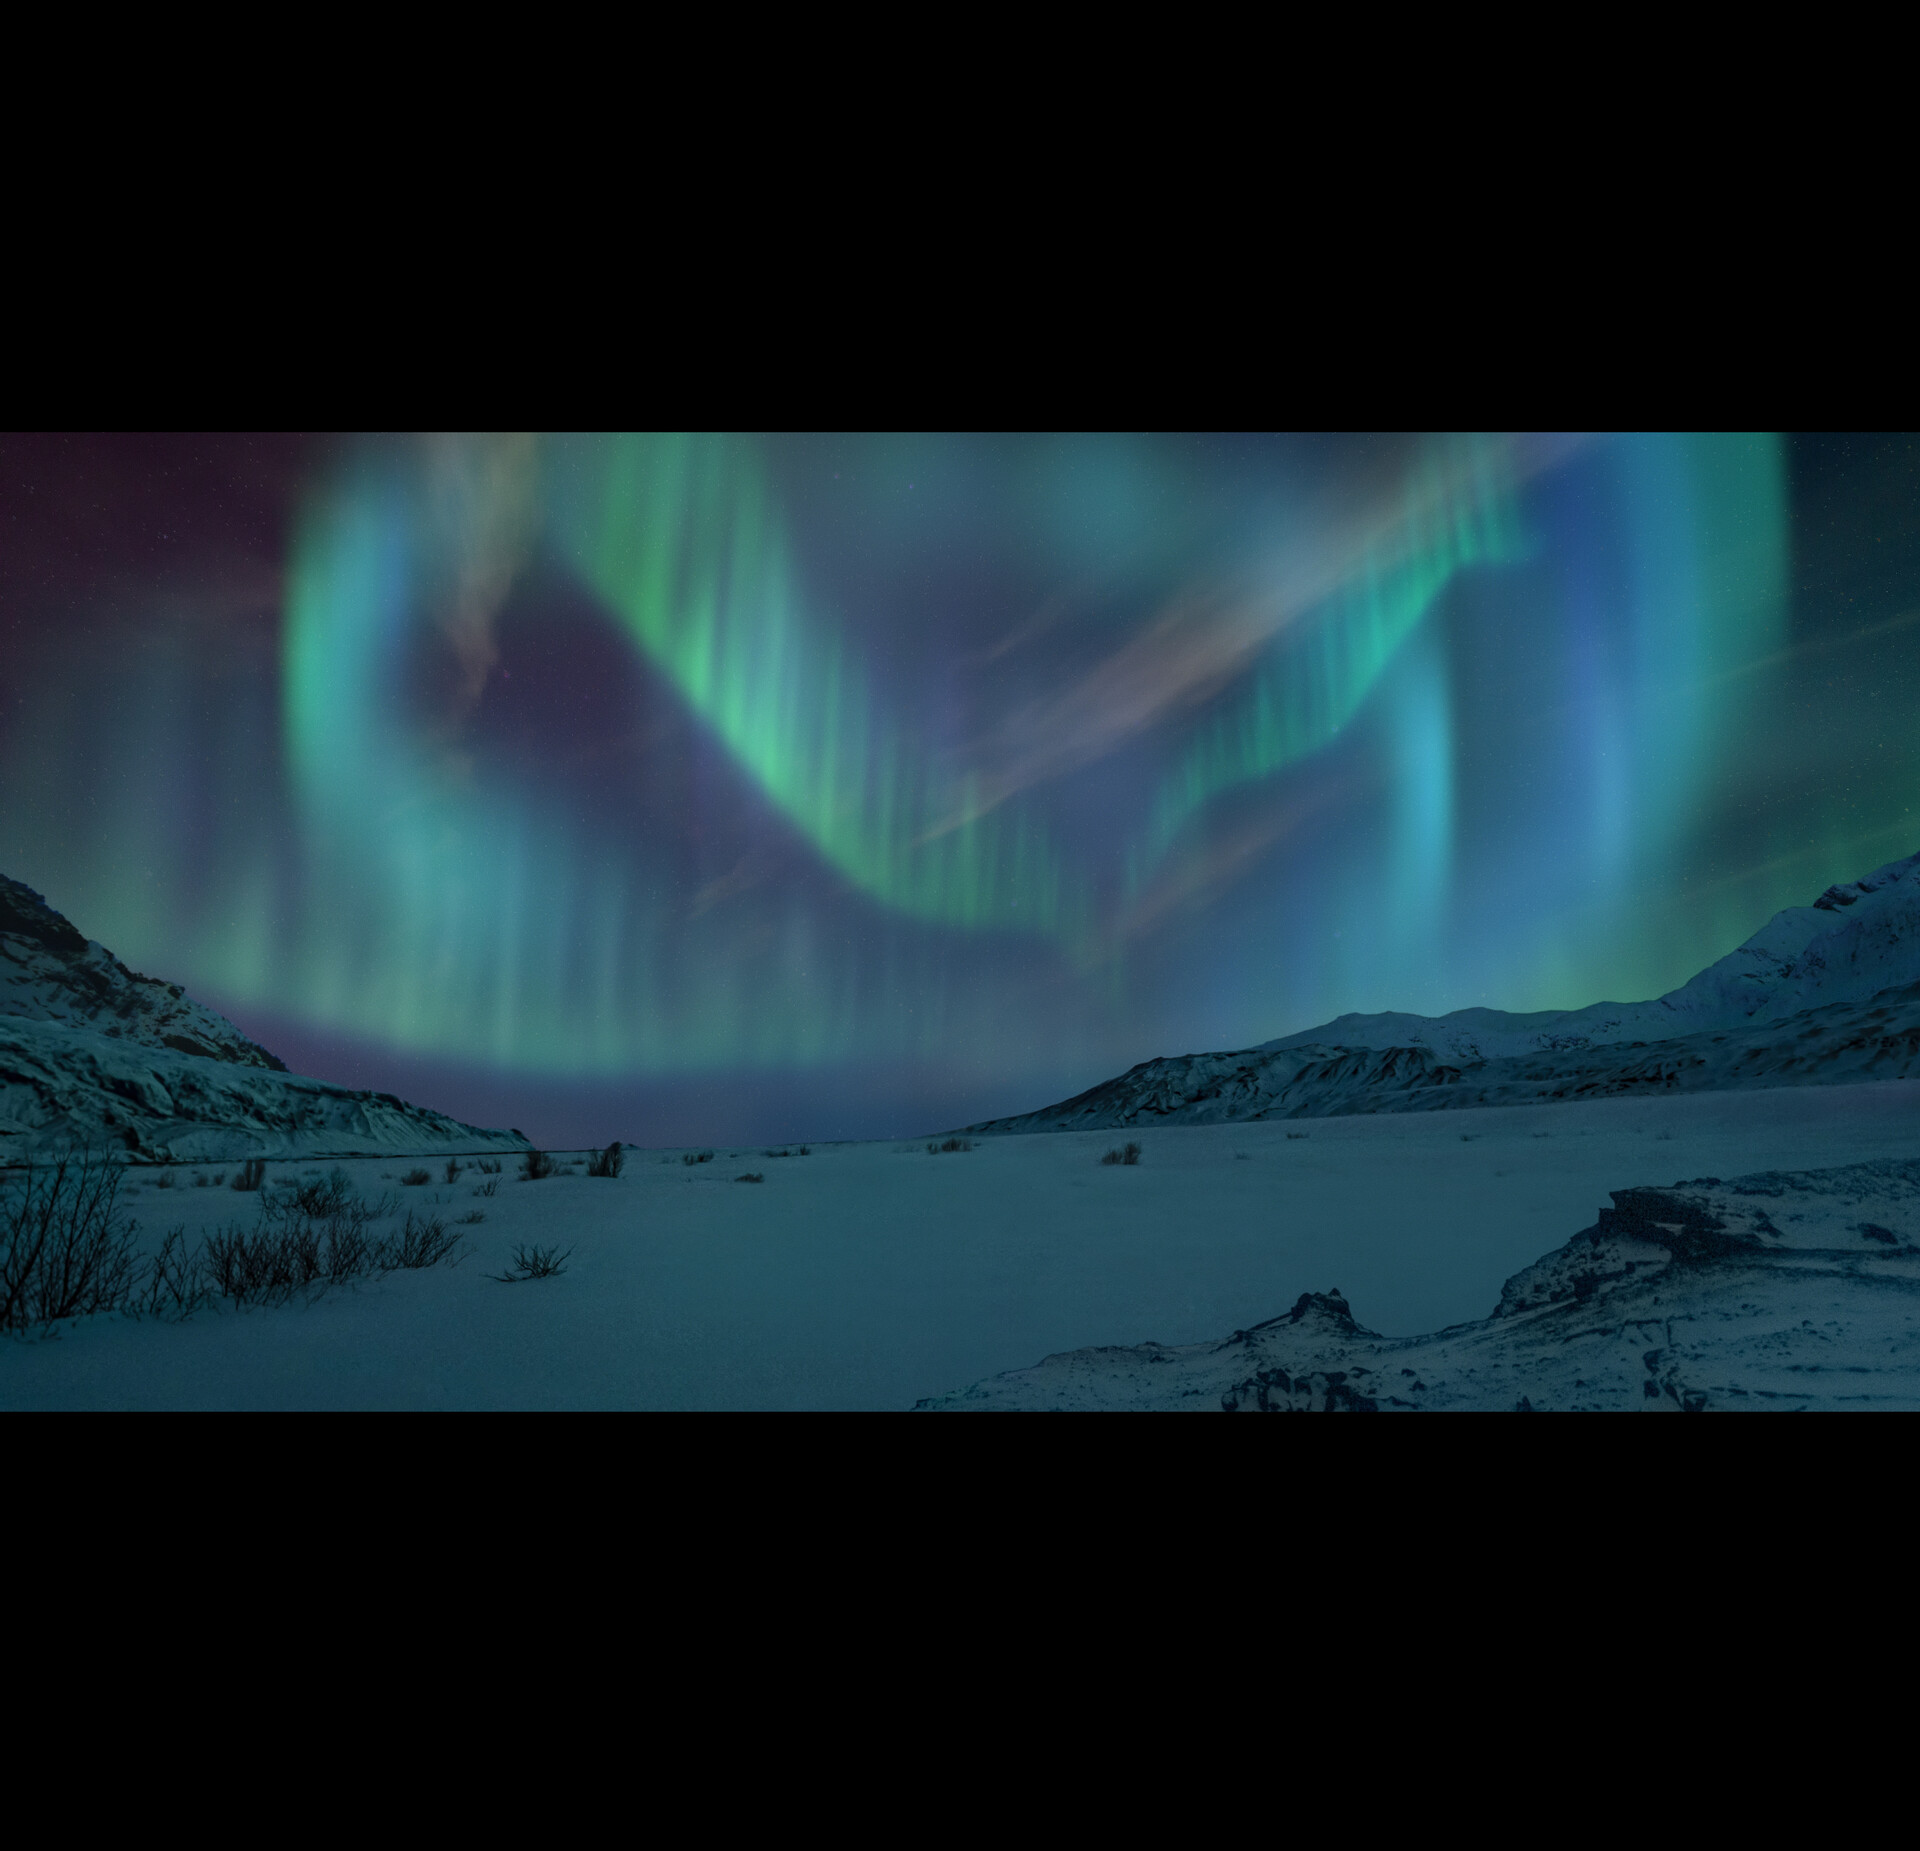 I worked in nuke to create the aurora sky, and I used Photoshop for the gro...